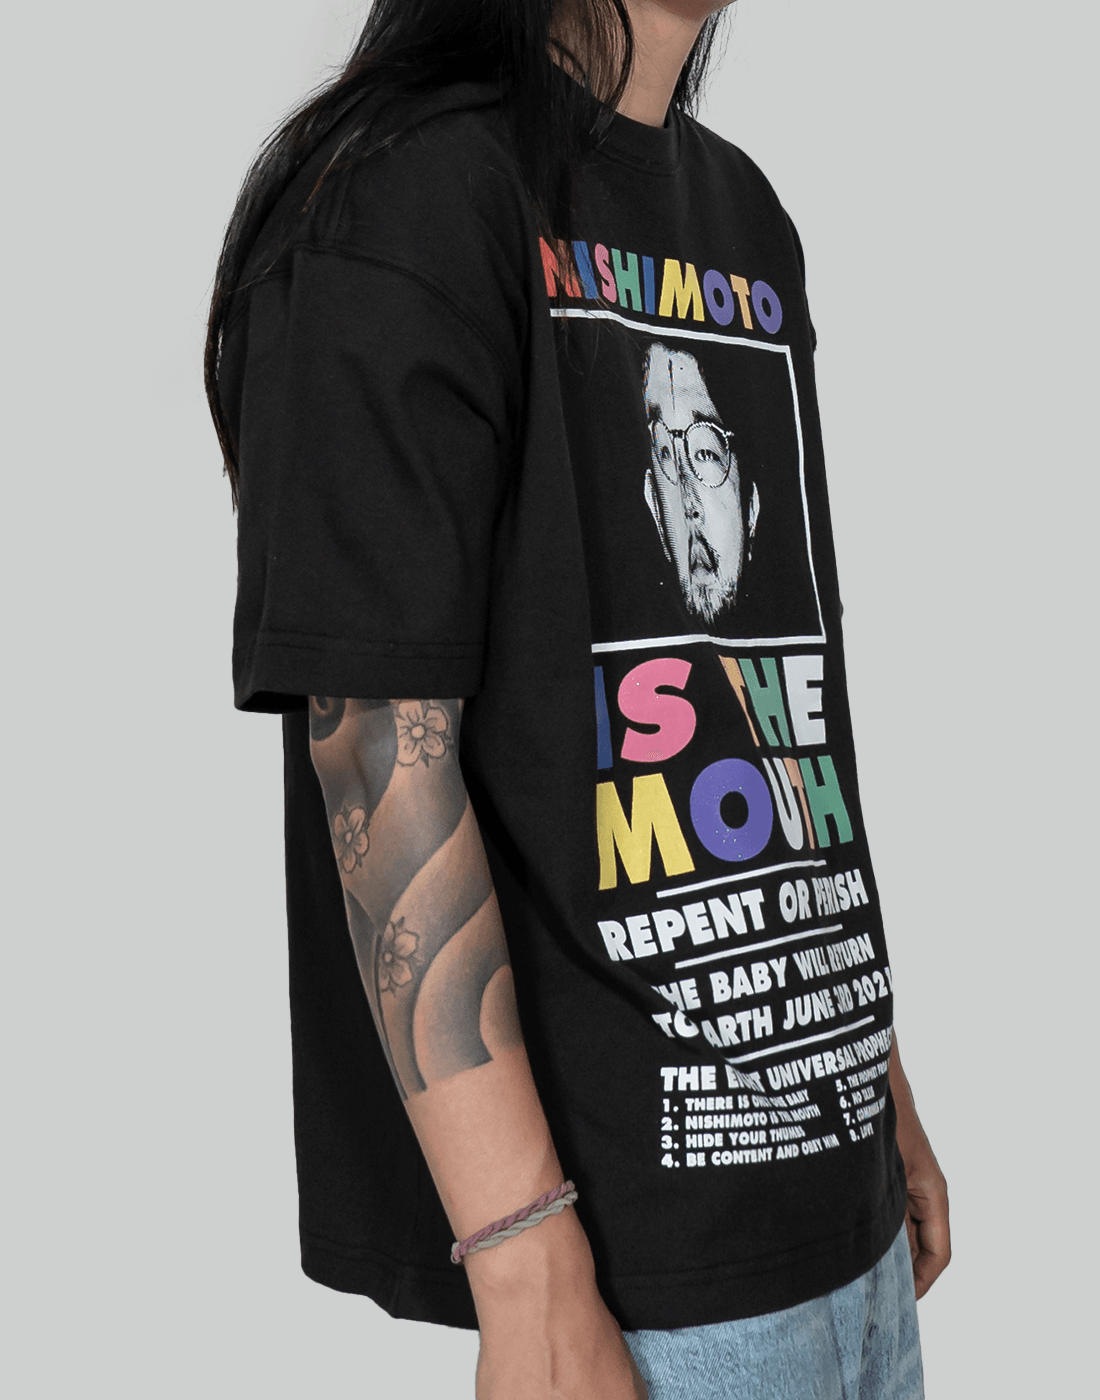 NISHIMOTO IS THE MOUTH CLASSIC TEE (GLITTER) - 082plus